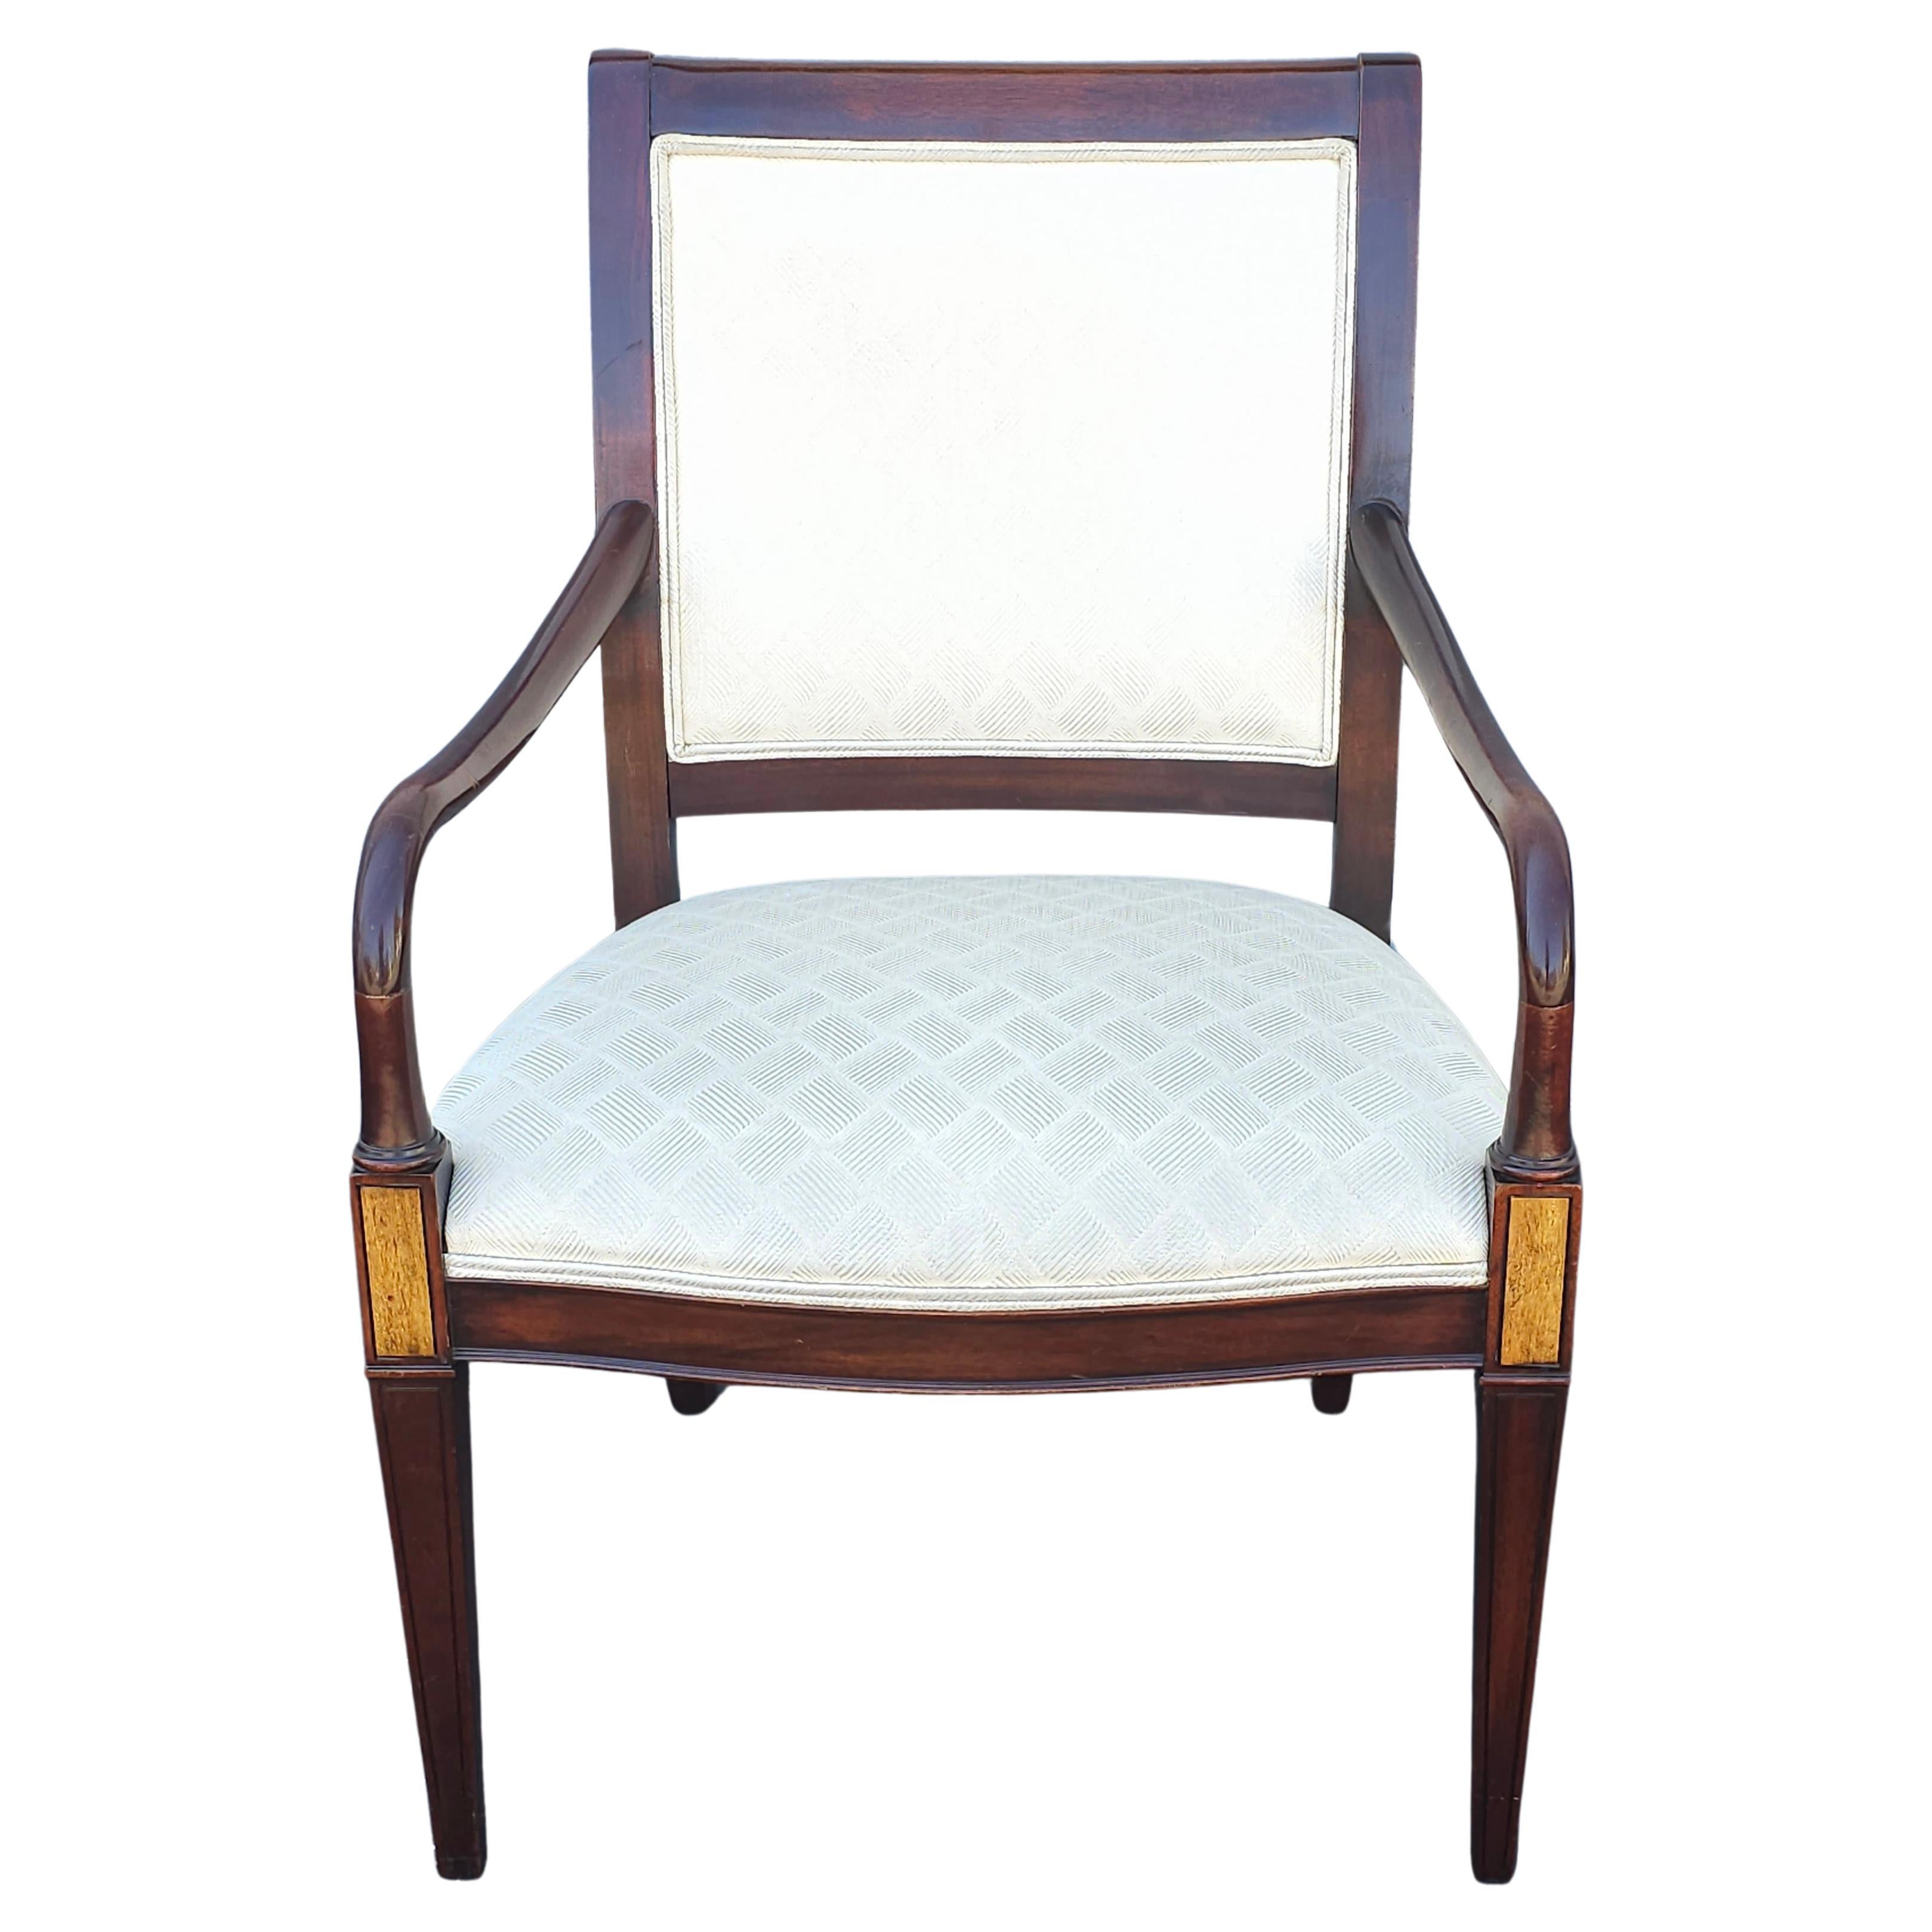 20th C. Hickory Chair Federal Style Mahogany Inlaid and Upholstered Arm Chair For Sale